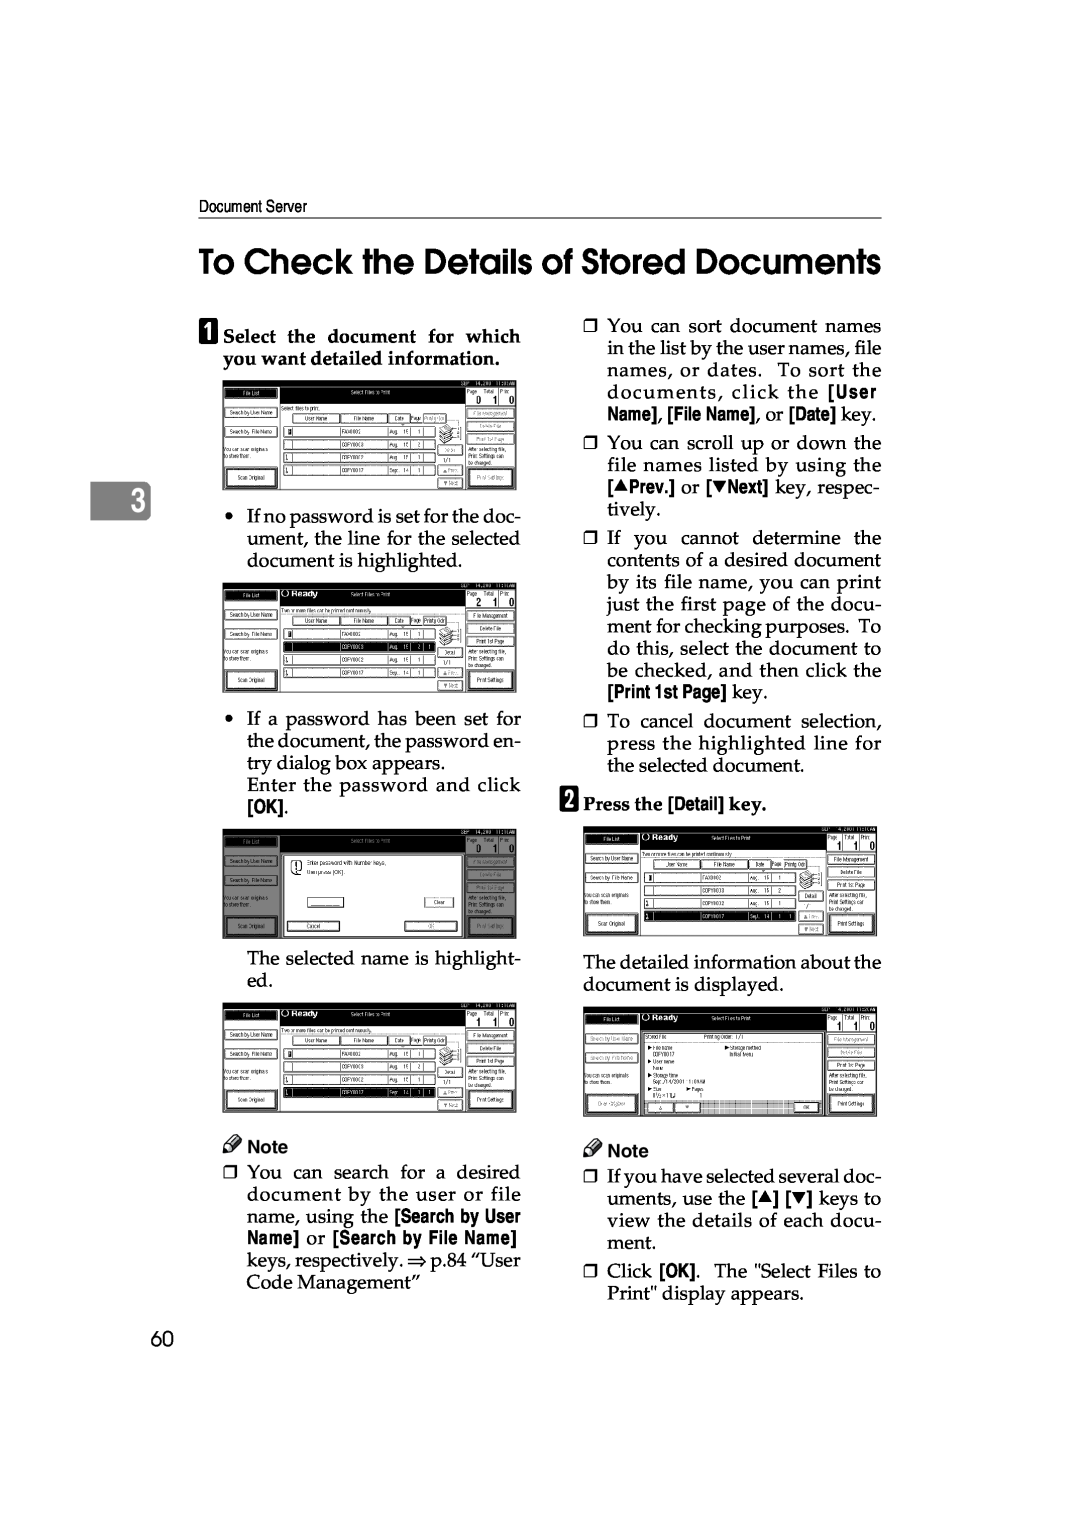 Lanier 5627 AG To Check the Details of Stored Documents, A Select the document for which you want detailed information 